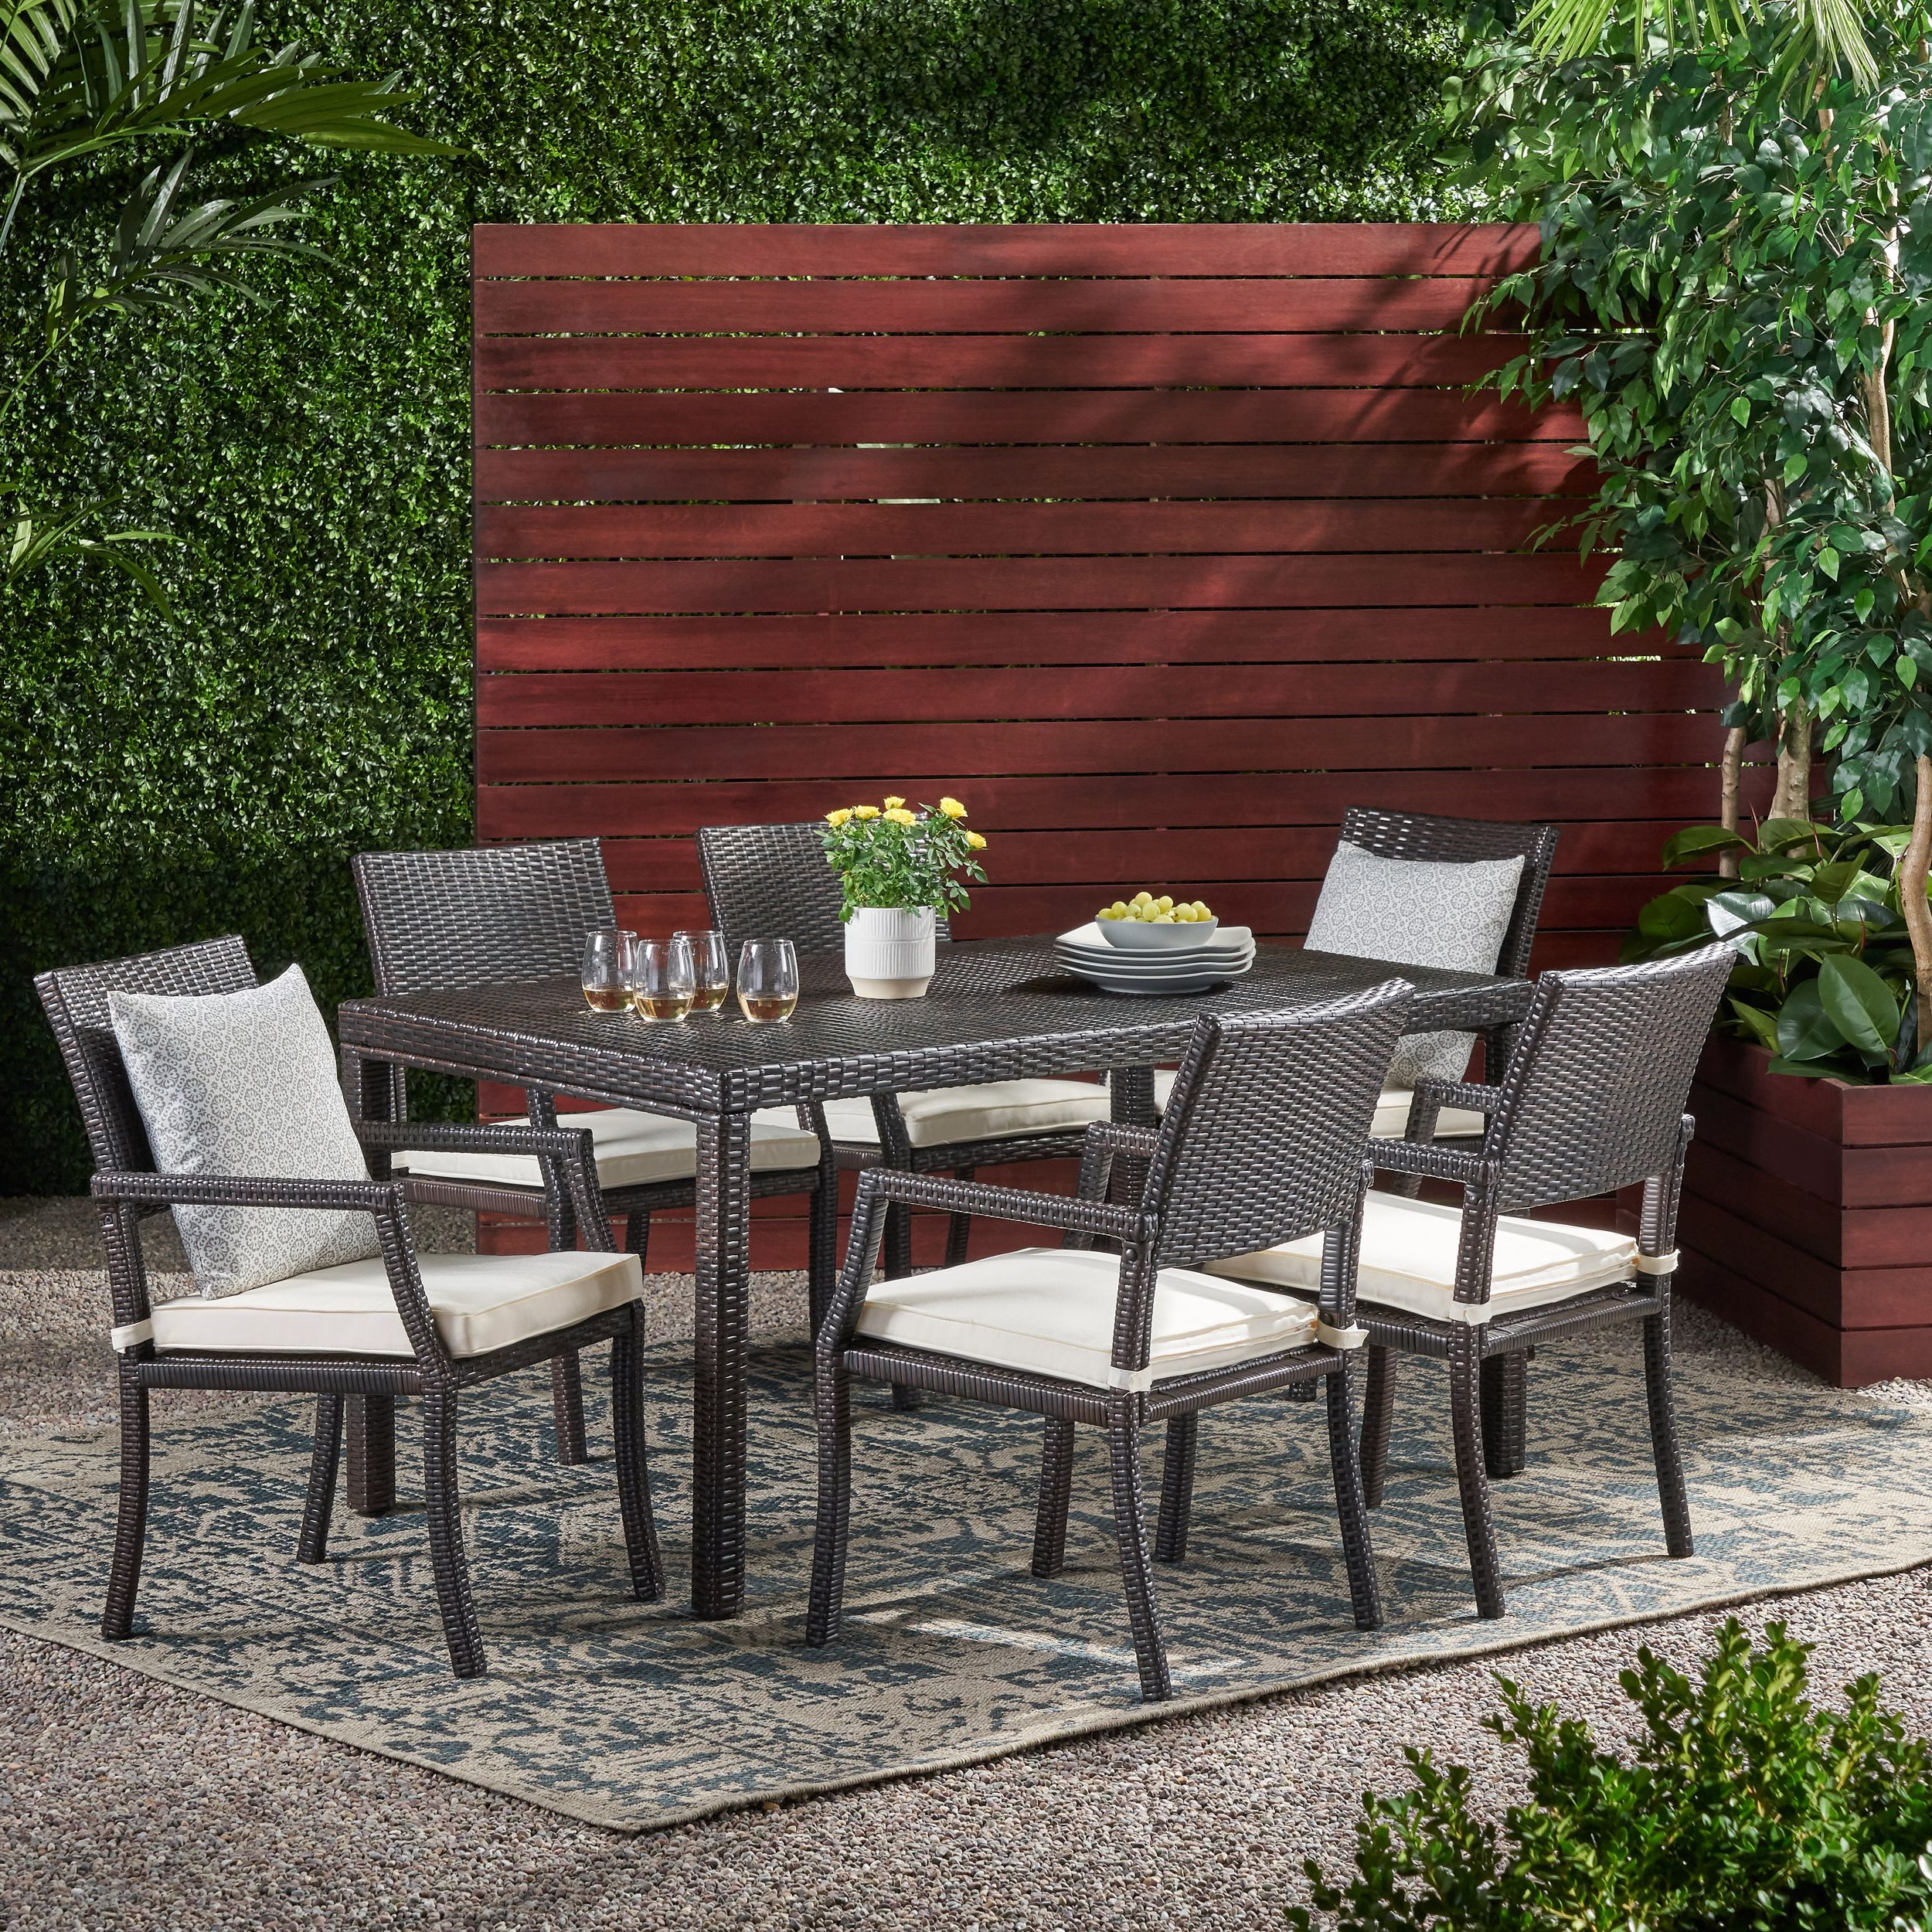 Outdoor 7 Piece Wicker Rectangular Dining Set,multibrown,white Within Well Liked Rectangular Patio Dining Sets (View 1 of 15)